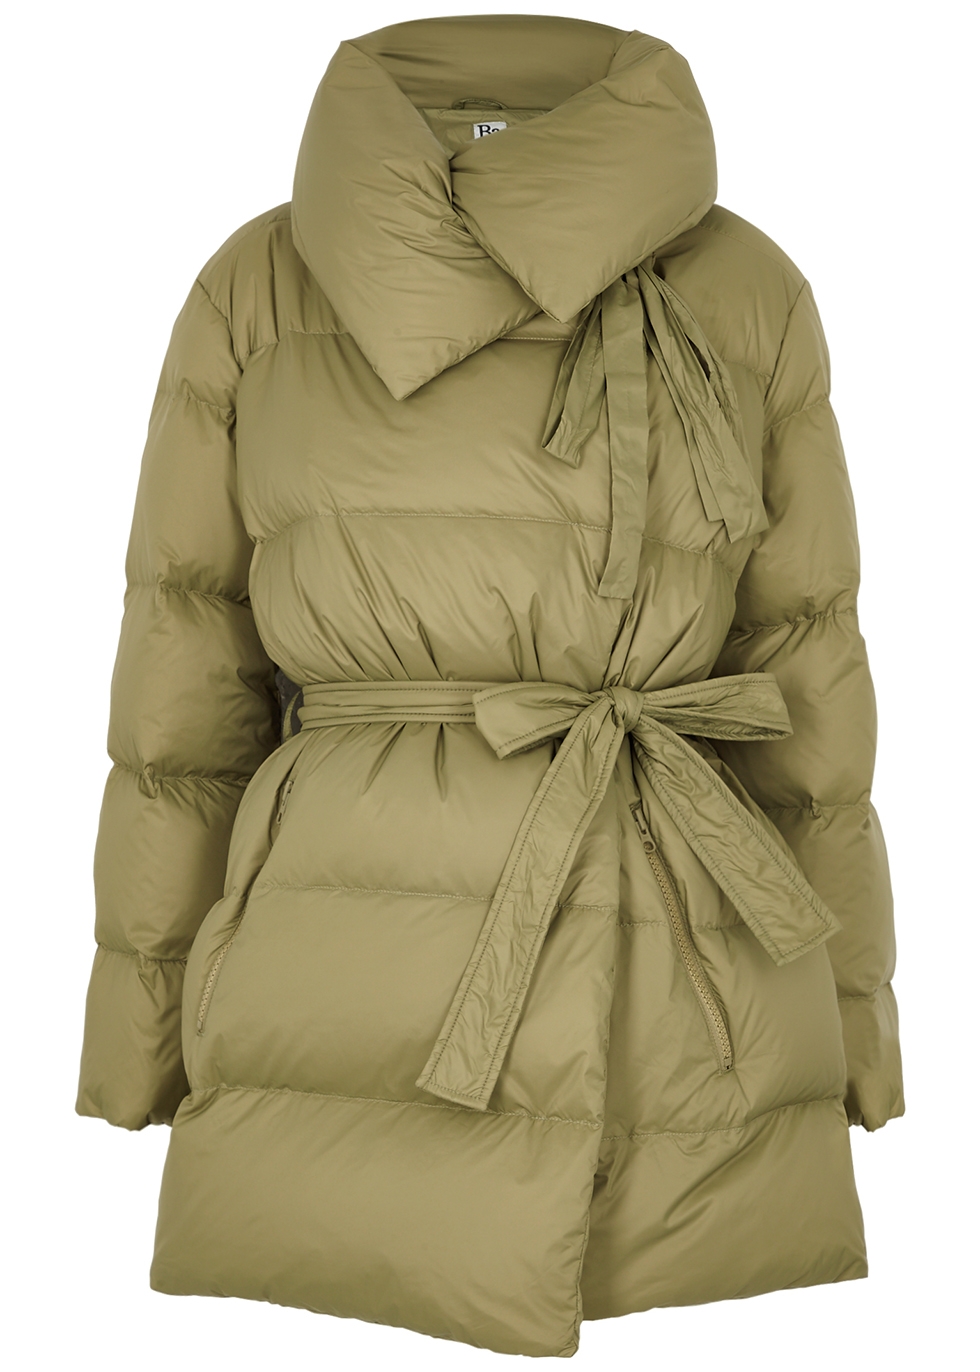 Puffa 75 Superwalt olive quilted shell jacket